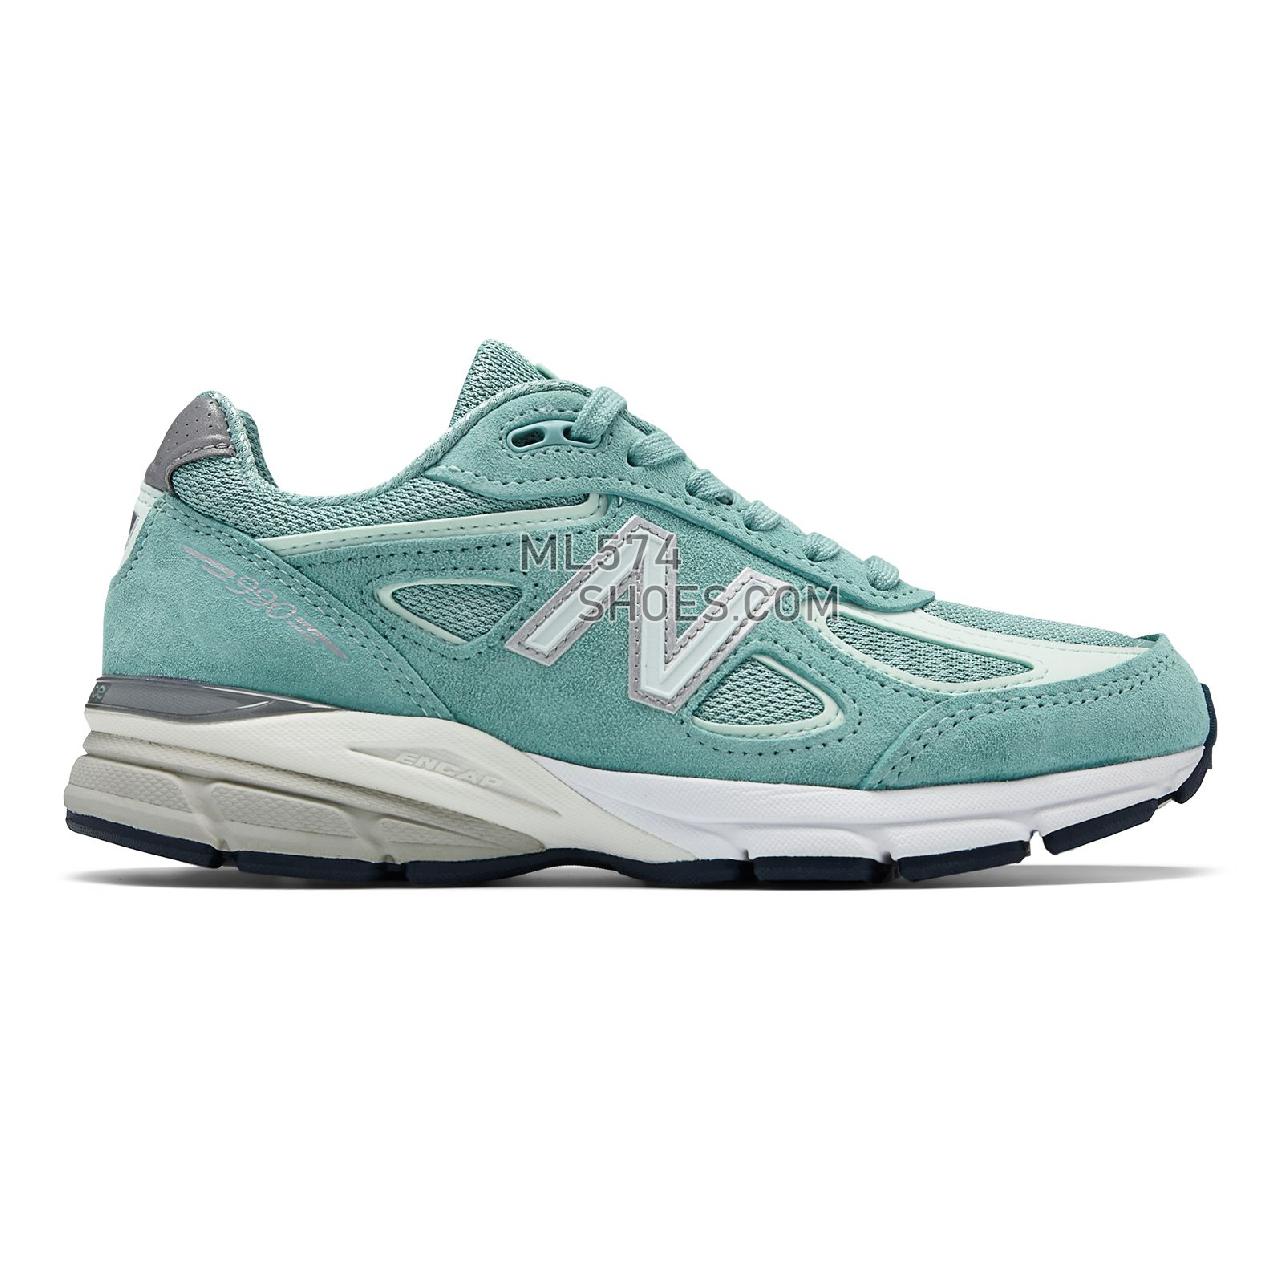 New Balance Womens 990v4 Made in US - Women's 990 - Running Mineral Sage with Seafoam - W990MS4